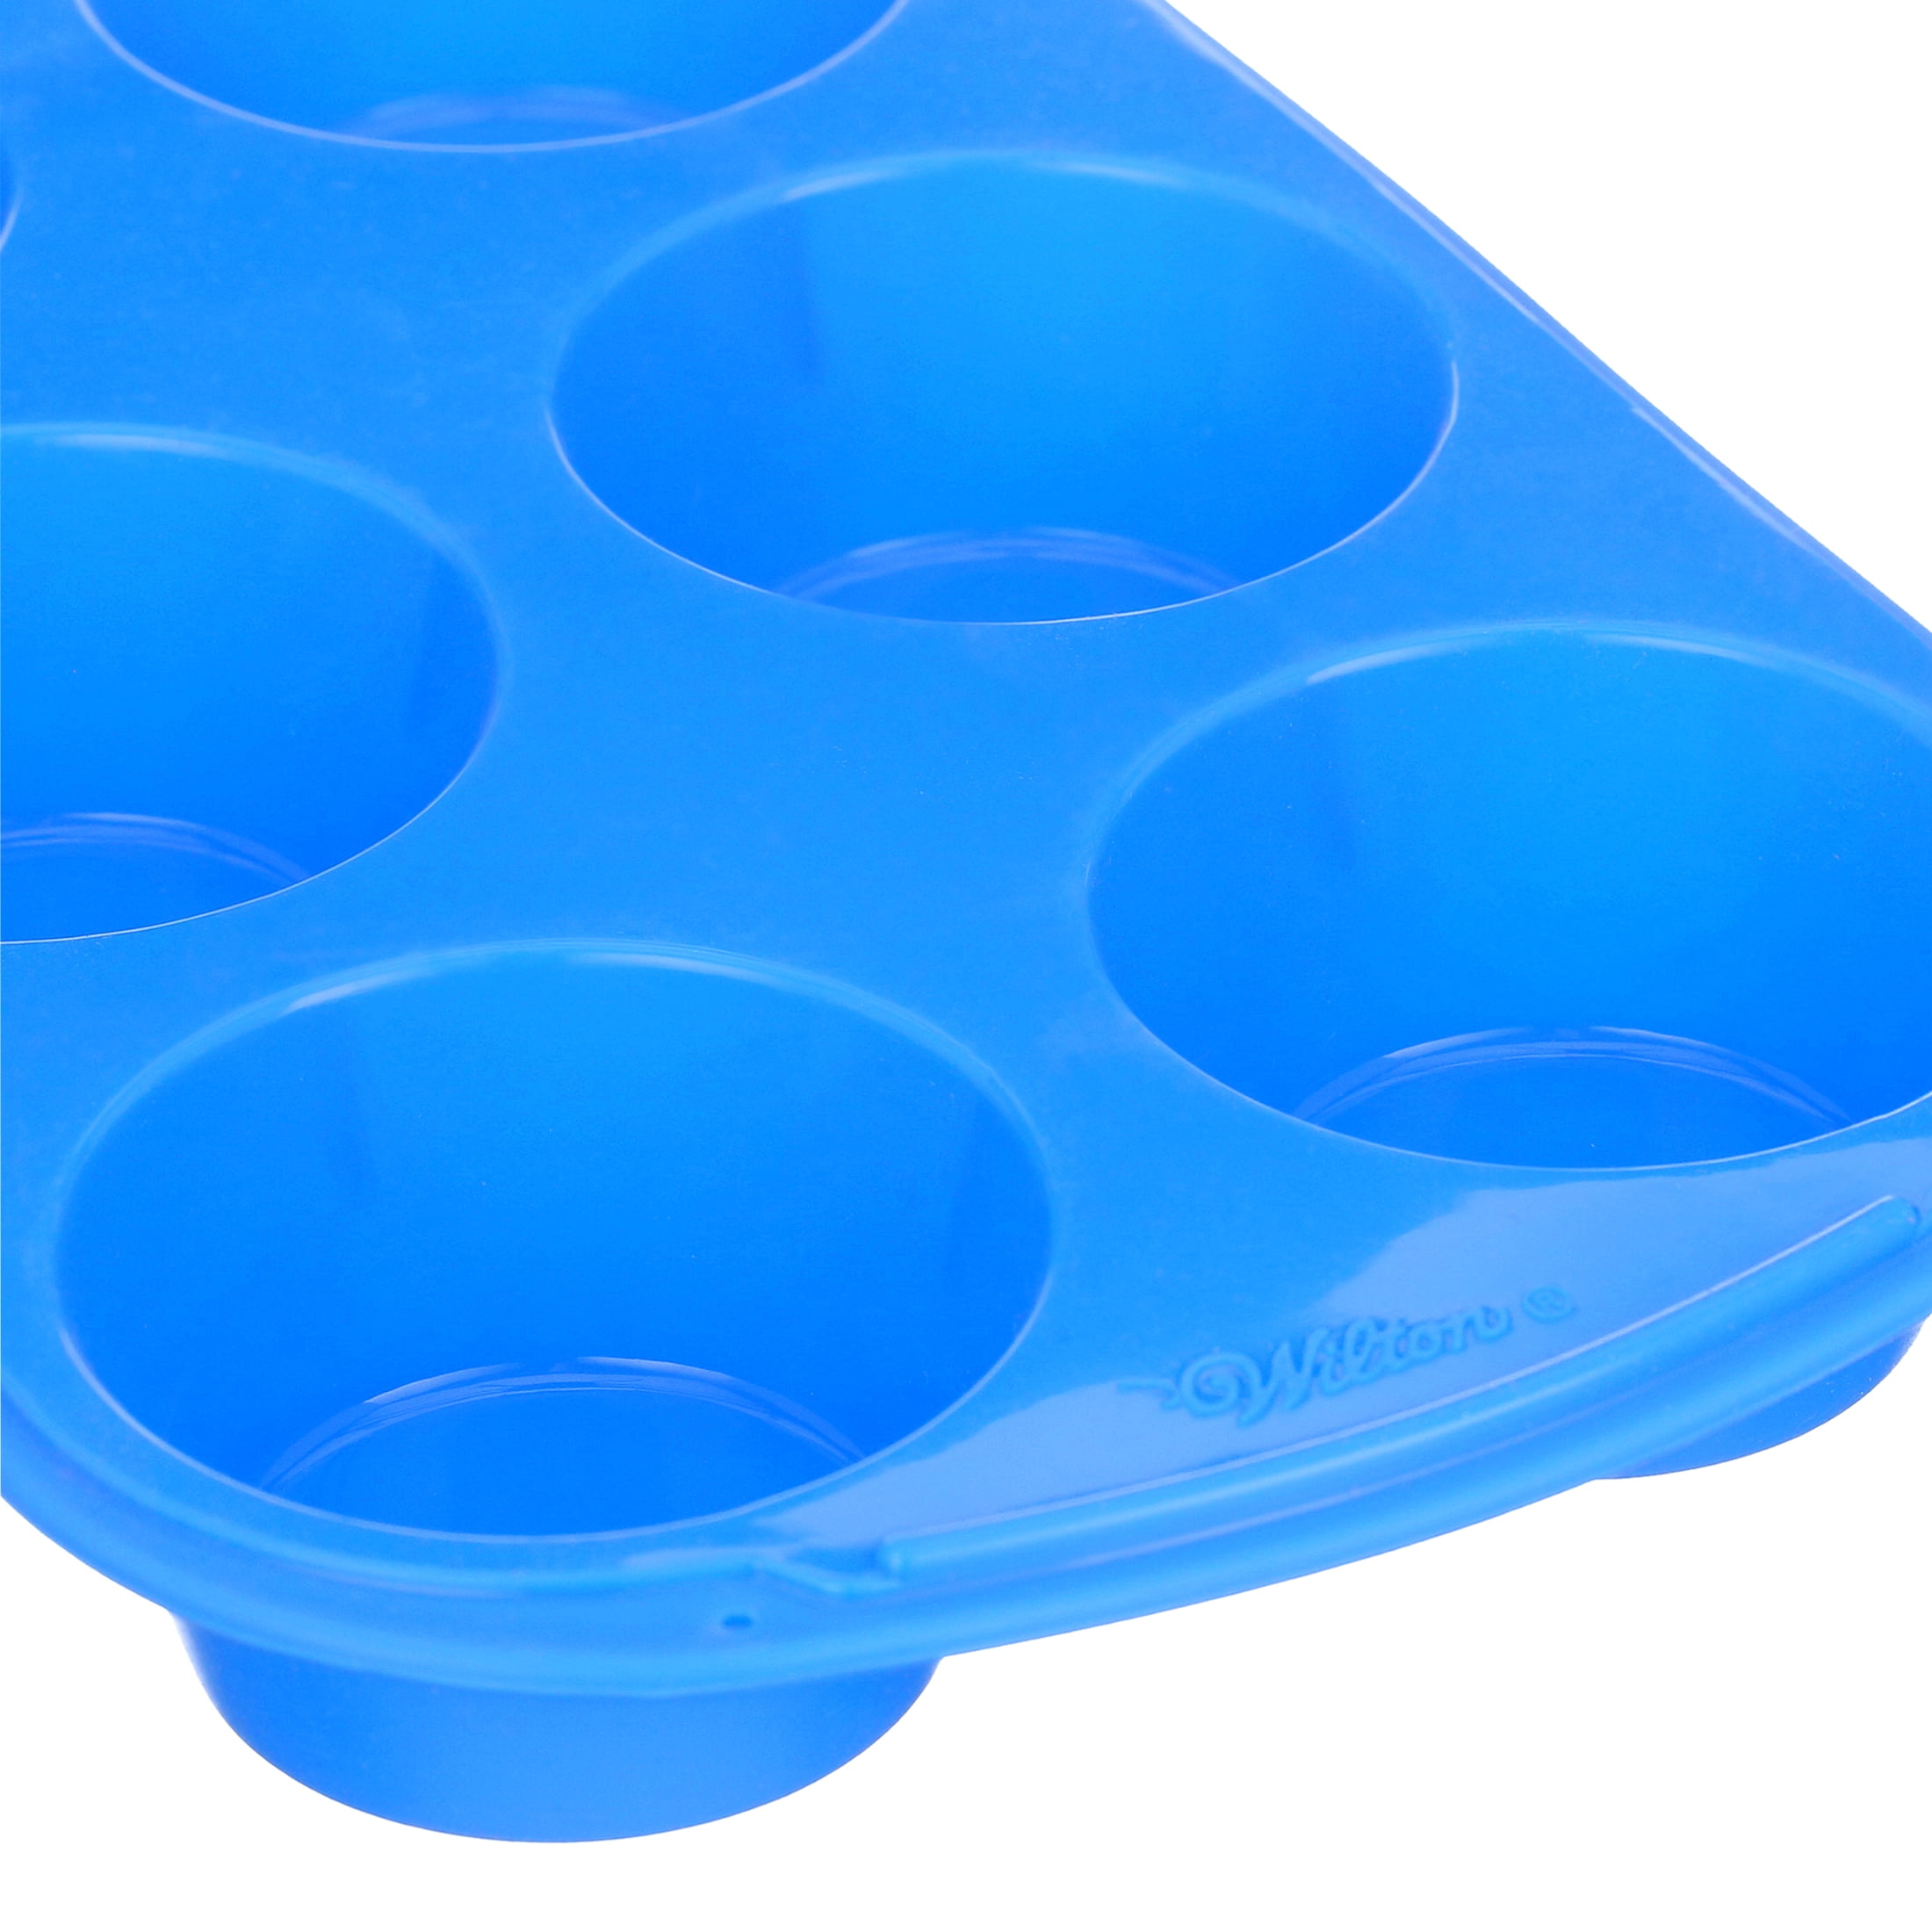 JH-072 Large Silicone Muffin Pan - Holar